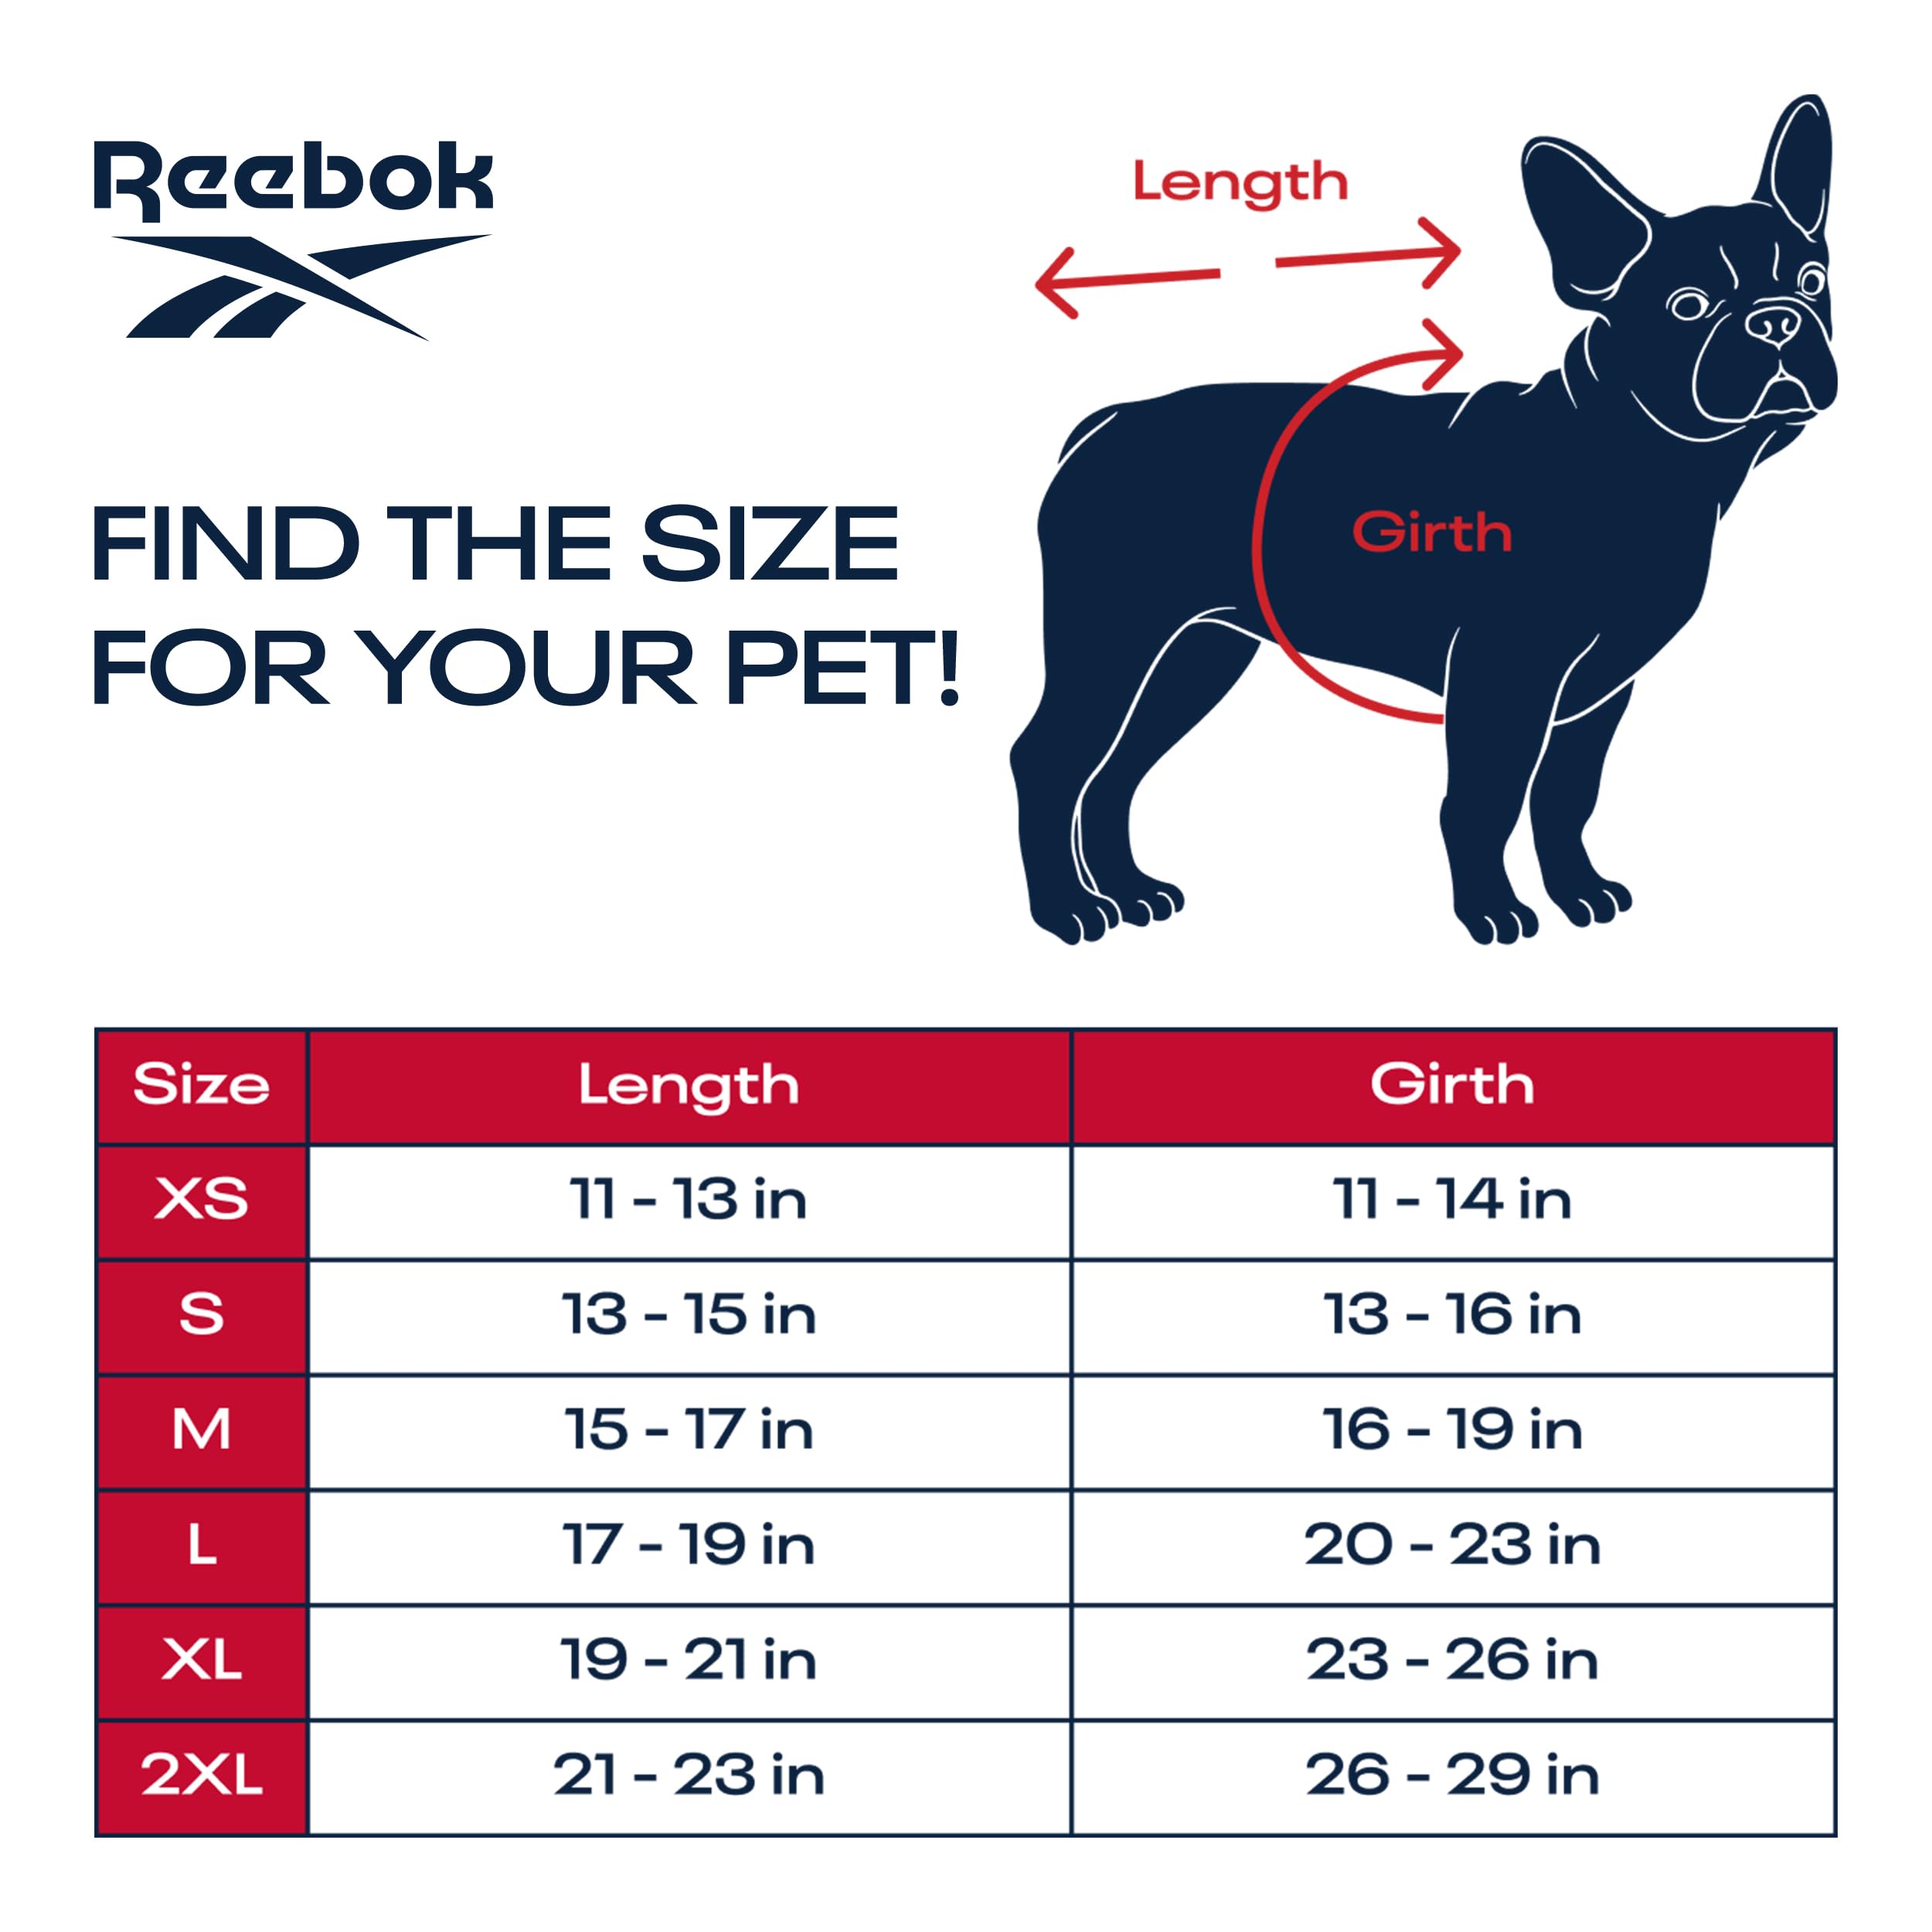 Reebok Dog Puffer Jacket - Waterproof Dog Vest with Hoodie, Dog Winter Clothes for Small, Medium, and Large Dogs, Premium Windproof Dog Snow Jacket Perfect for Cold Weather, Comes with Leash Hole